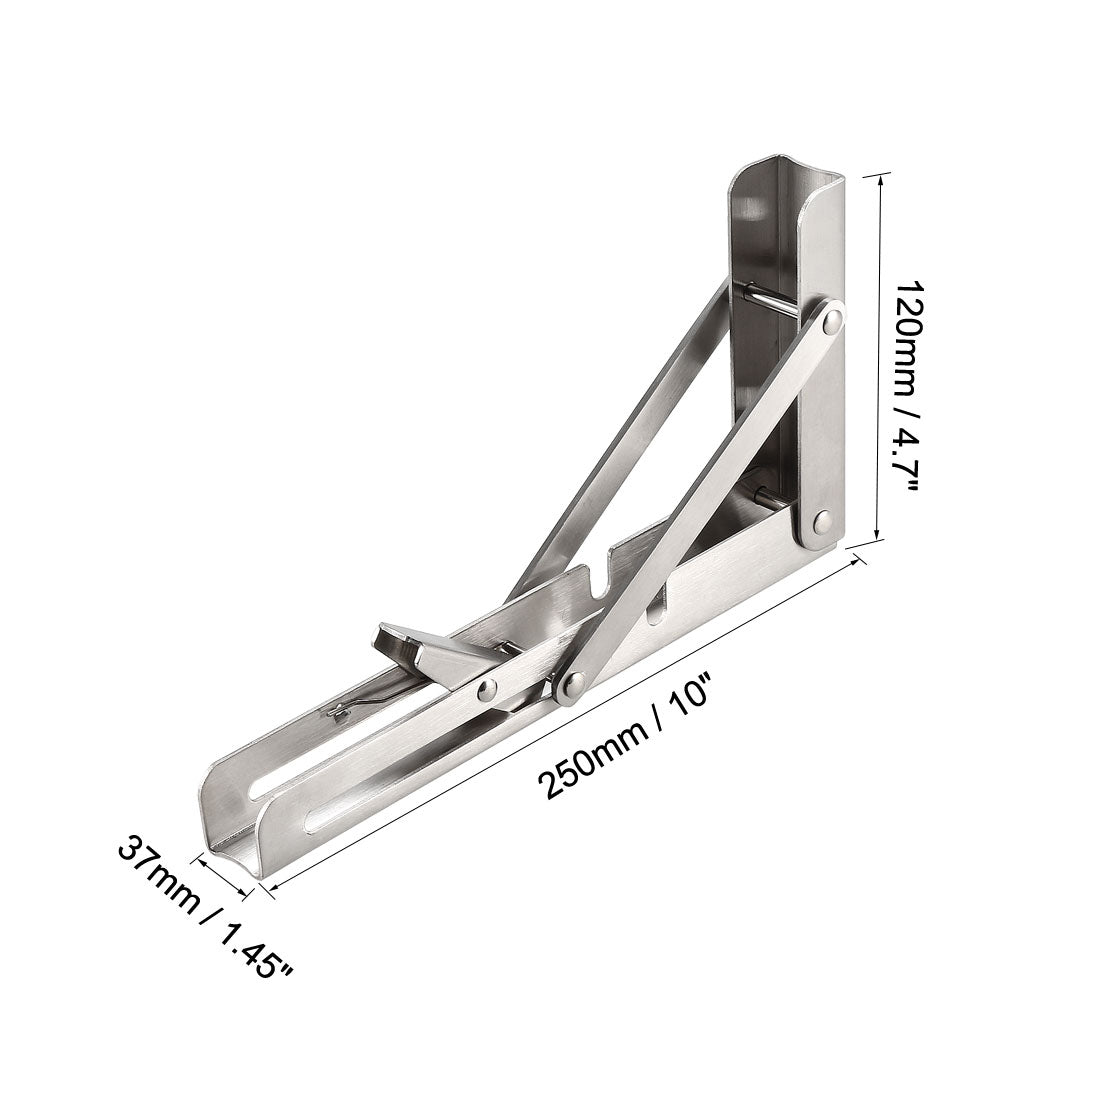 uxcell Uxcell Folding Bracket 10 inch 250mm for Shelf Table Desk Wall Mounted Support Collapsible Long Release Arm Space Saving Stainless Steel